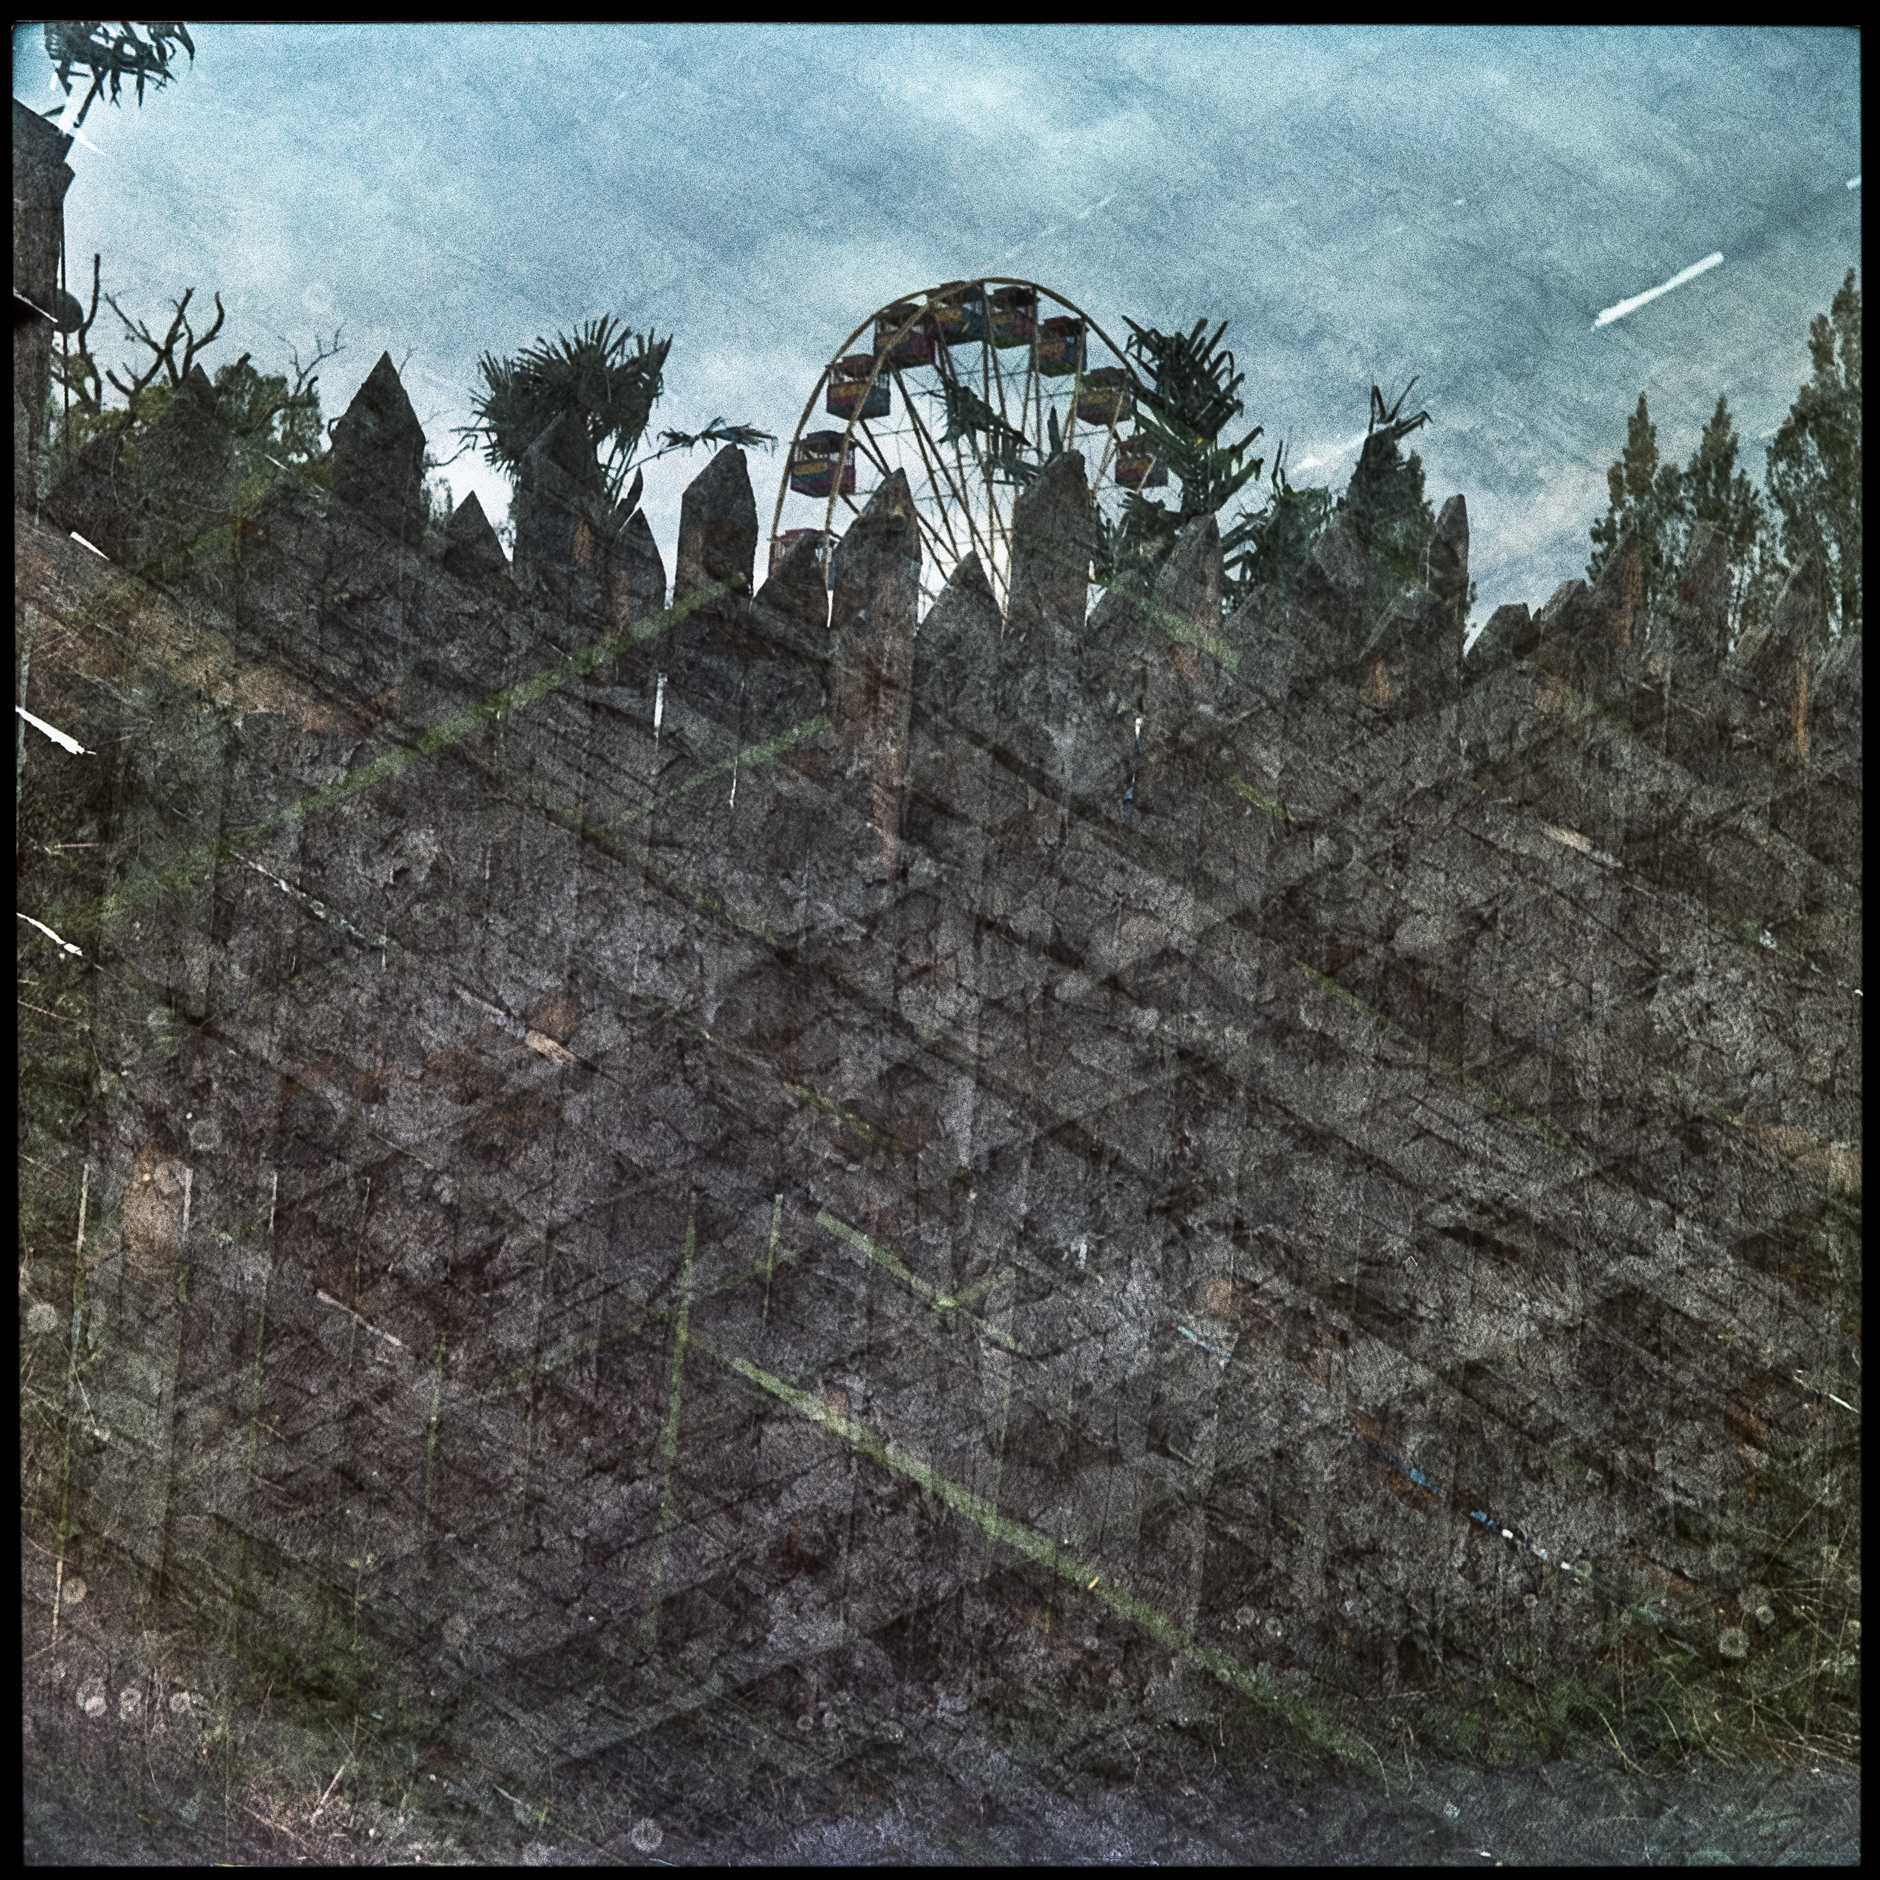 Multiple exposure, a process exercise